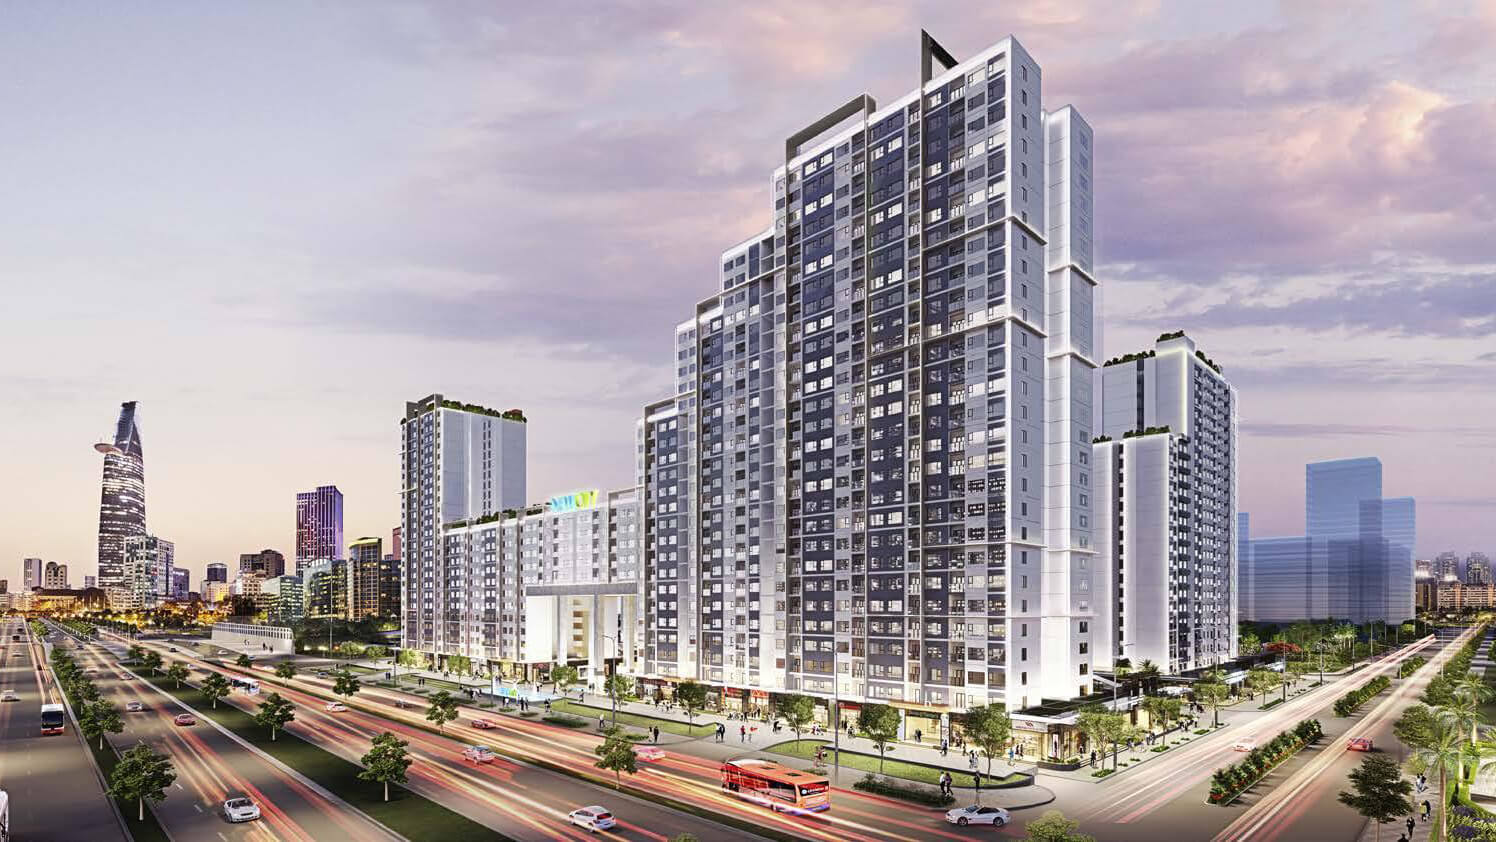 Life and civilized living space, the condo model has become the top choice among homebuyers in big metropolises in Vietnam.